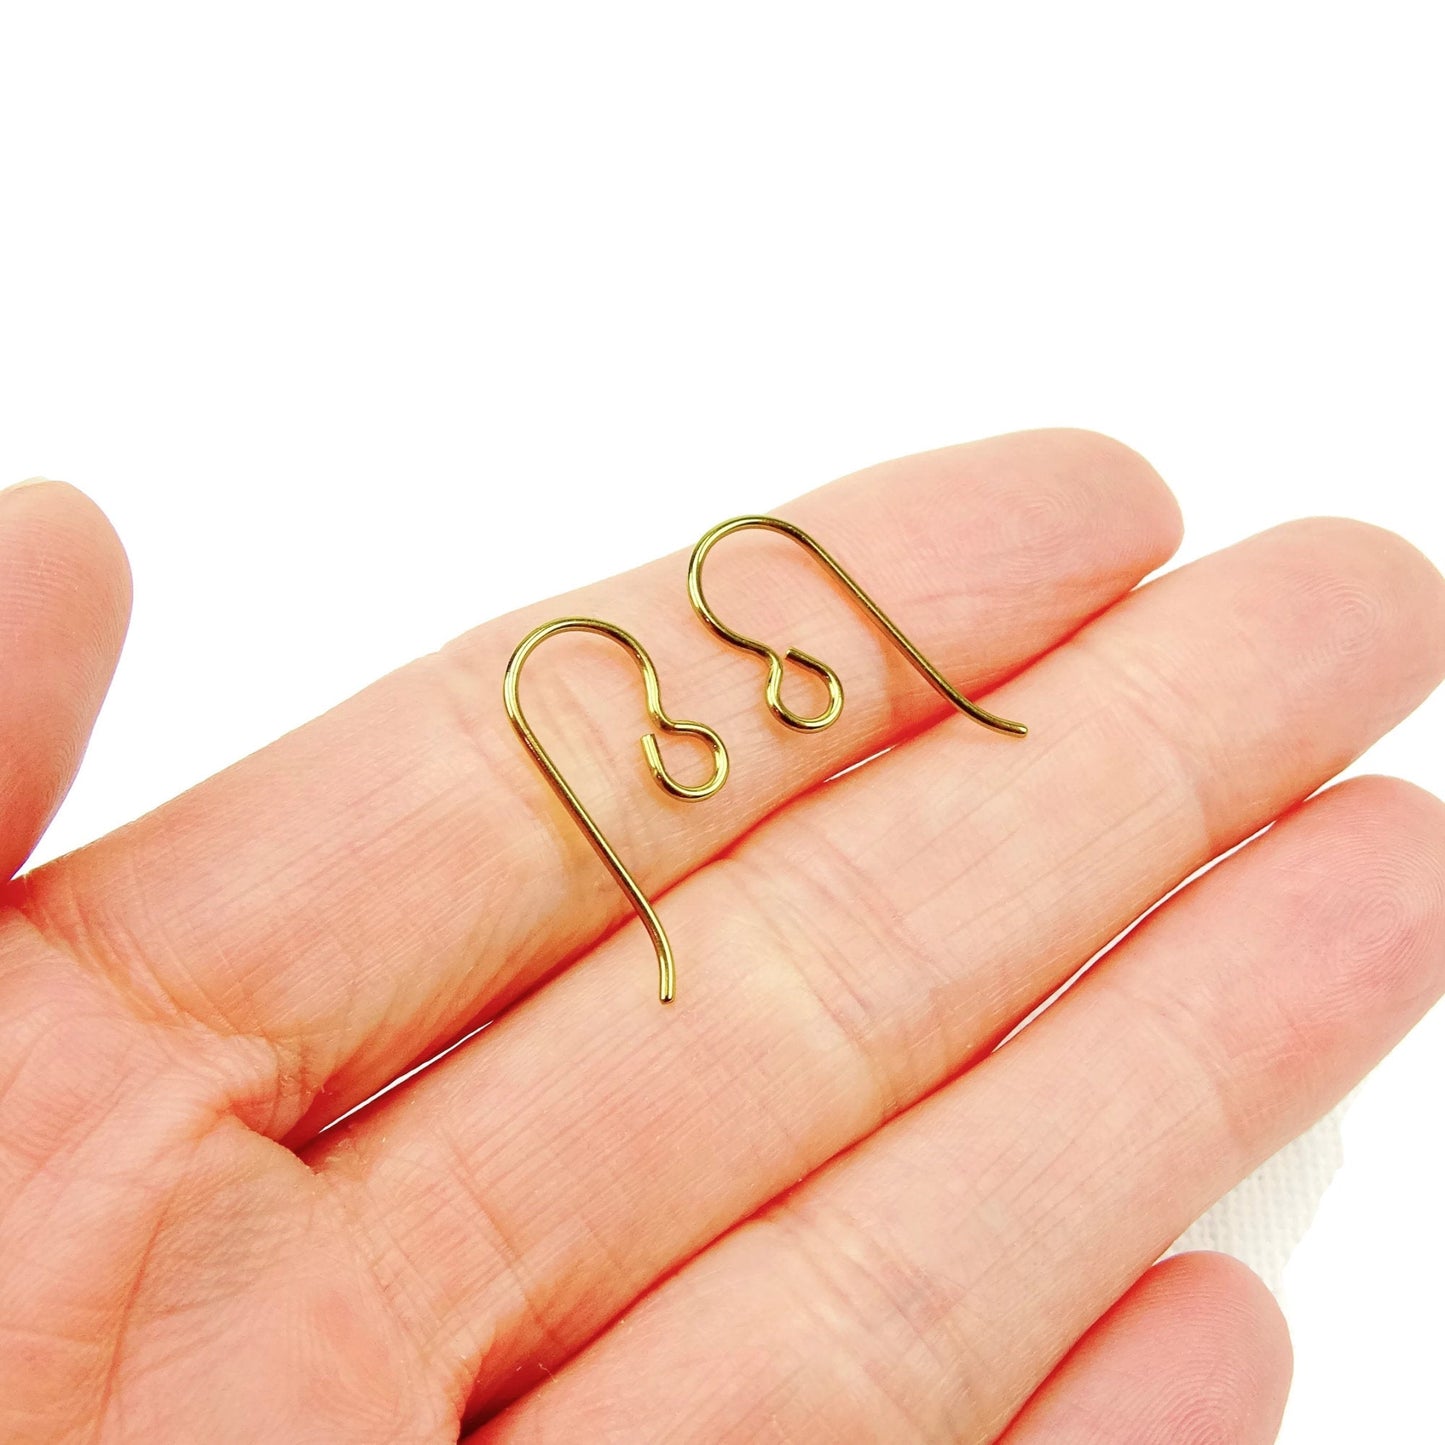 Niobium Earwire Hooks Yellow-gold, French Hooks Pure Niobium Wire,  Nickel Free Ear Wires, Hypoallergenic DIY Replacement Earring Hooks